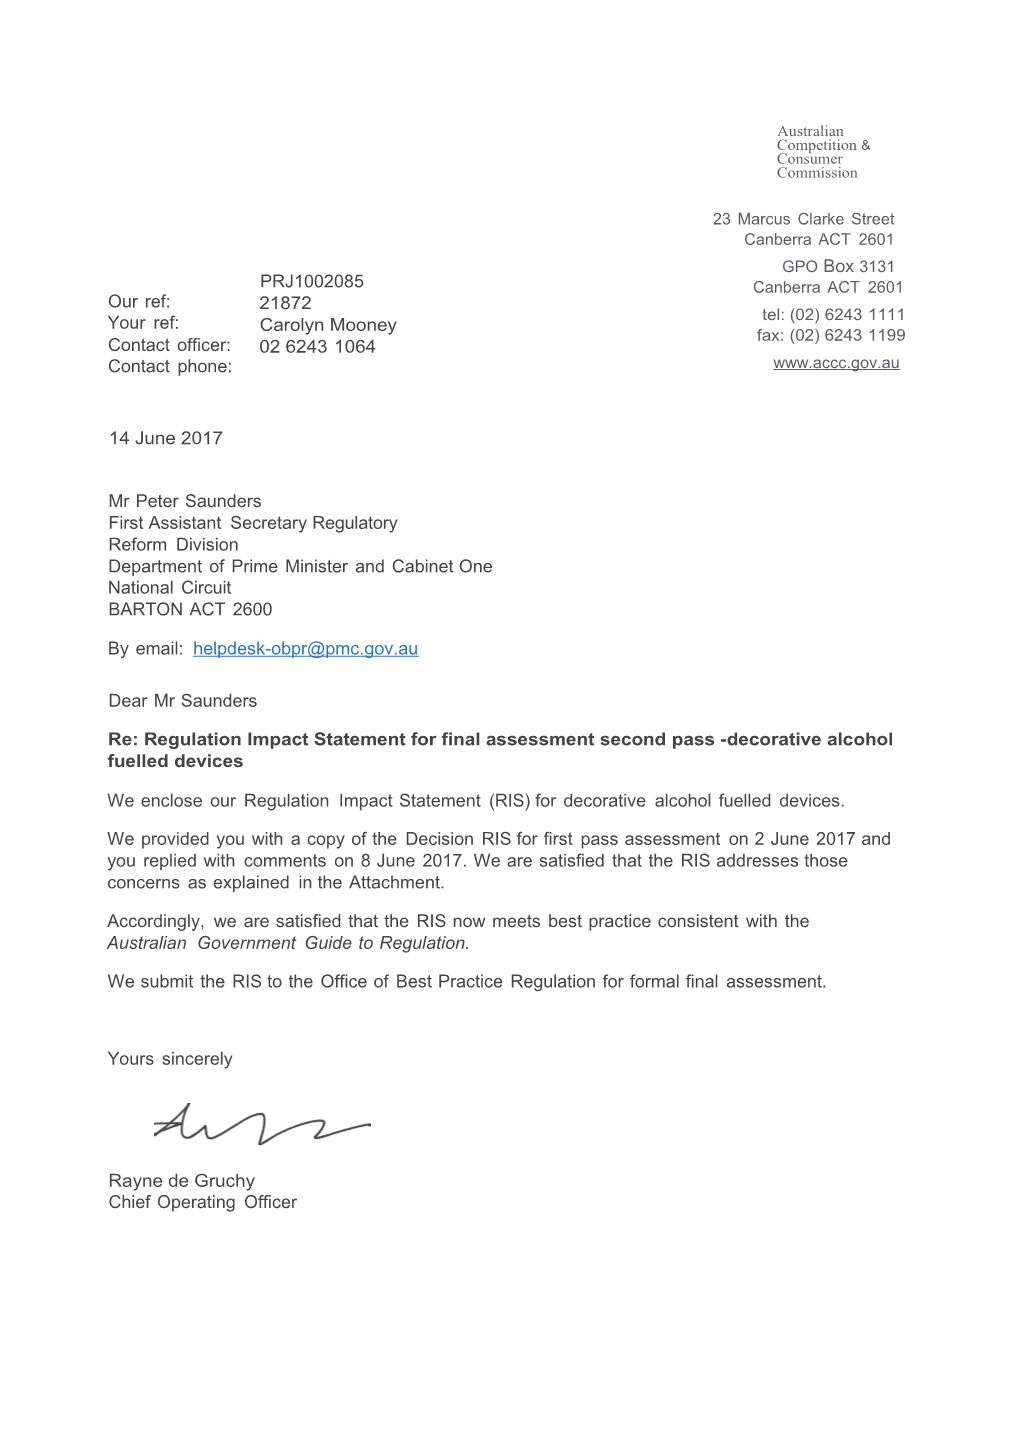 ACCC COO Certification Letter